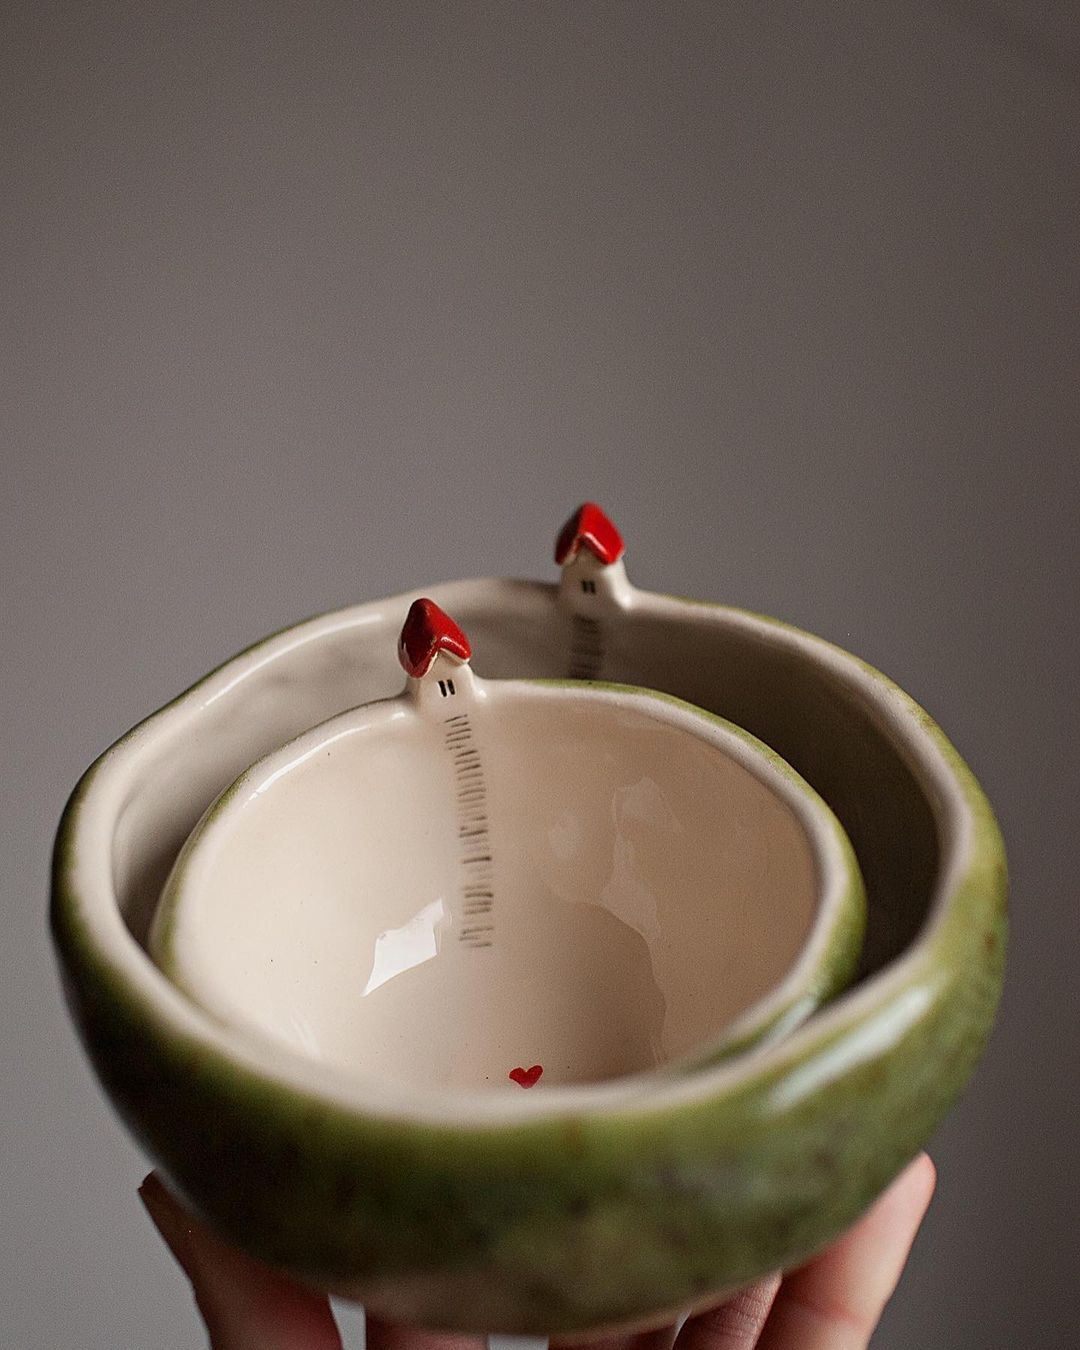 Delicate Ceramics Decorated With Lovely Figure Sculptures By Nadya And Olga (20)